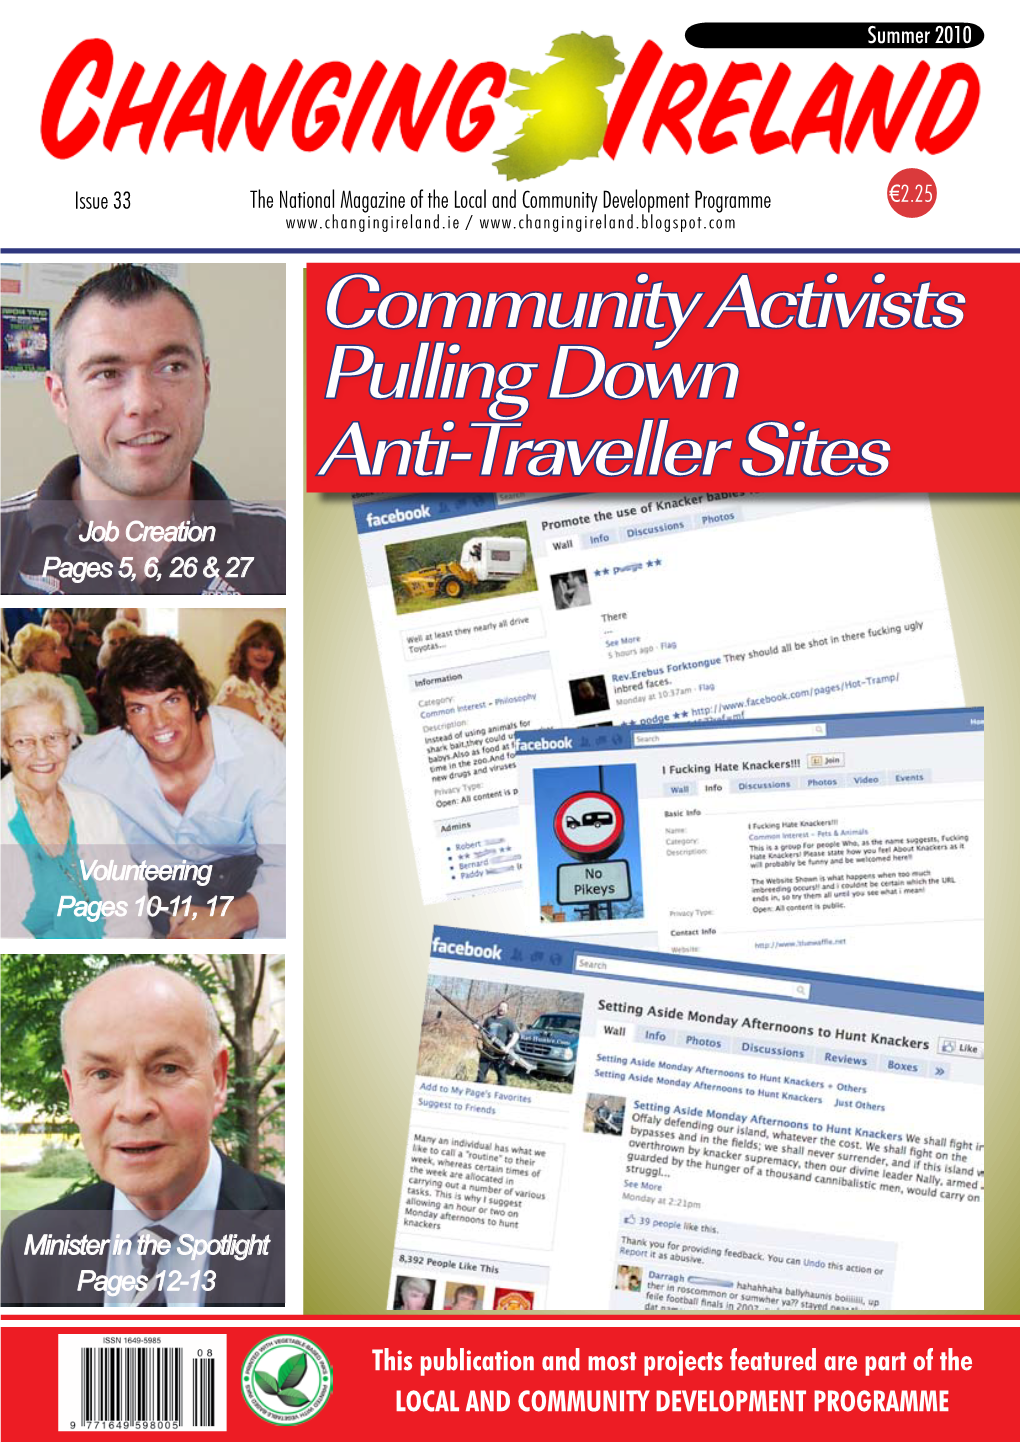 Issue 33: Community Activists' Muscle (Summer 2010)